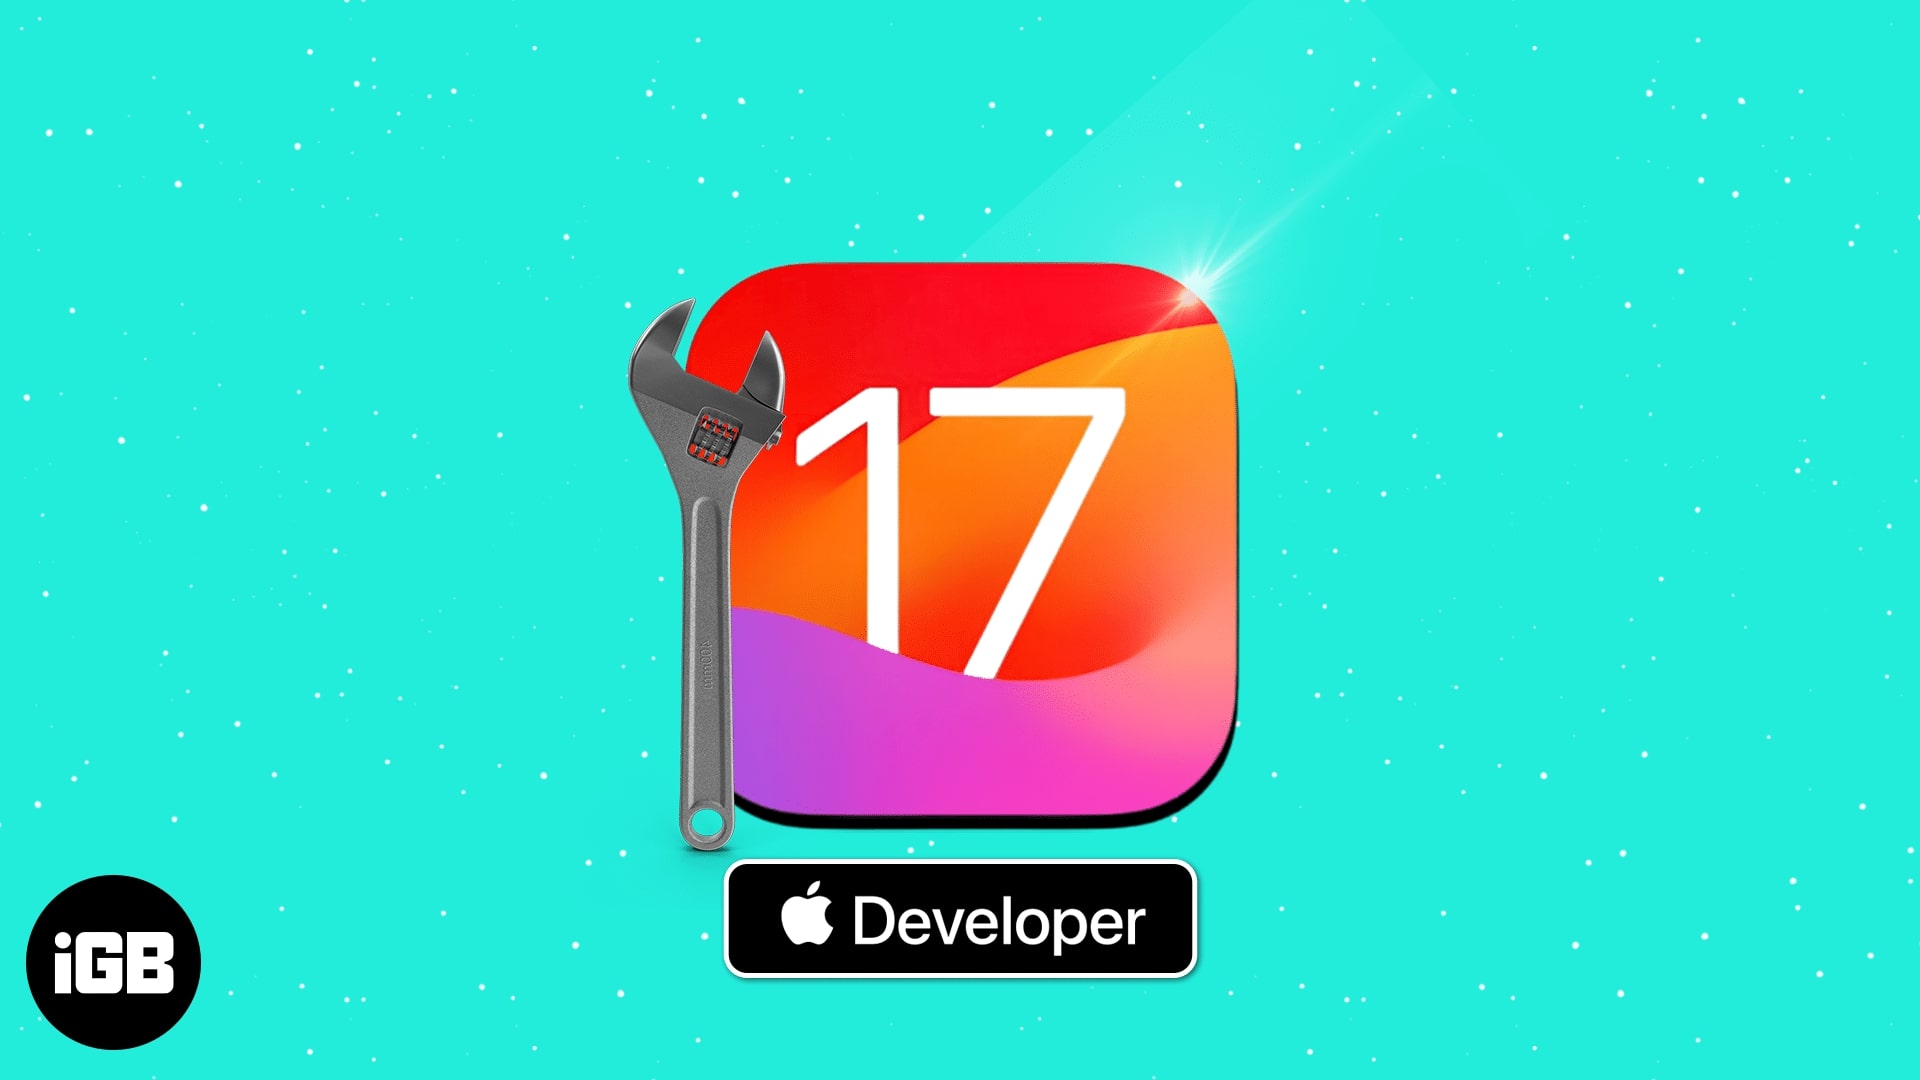 Download-and-install-iOS-17-developer-beta-on-iPhone